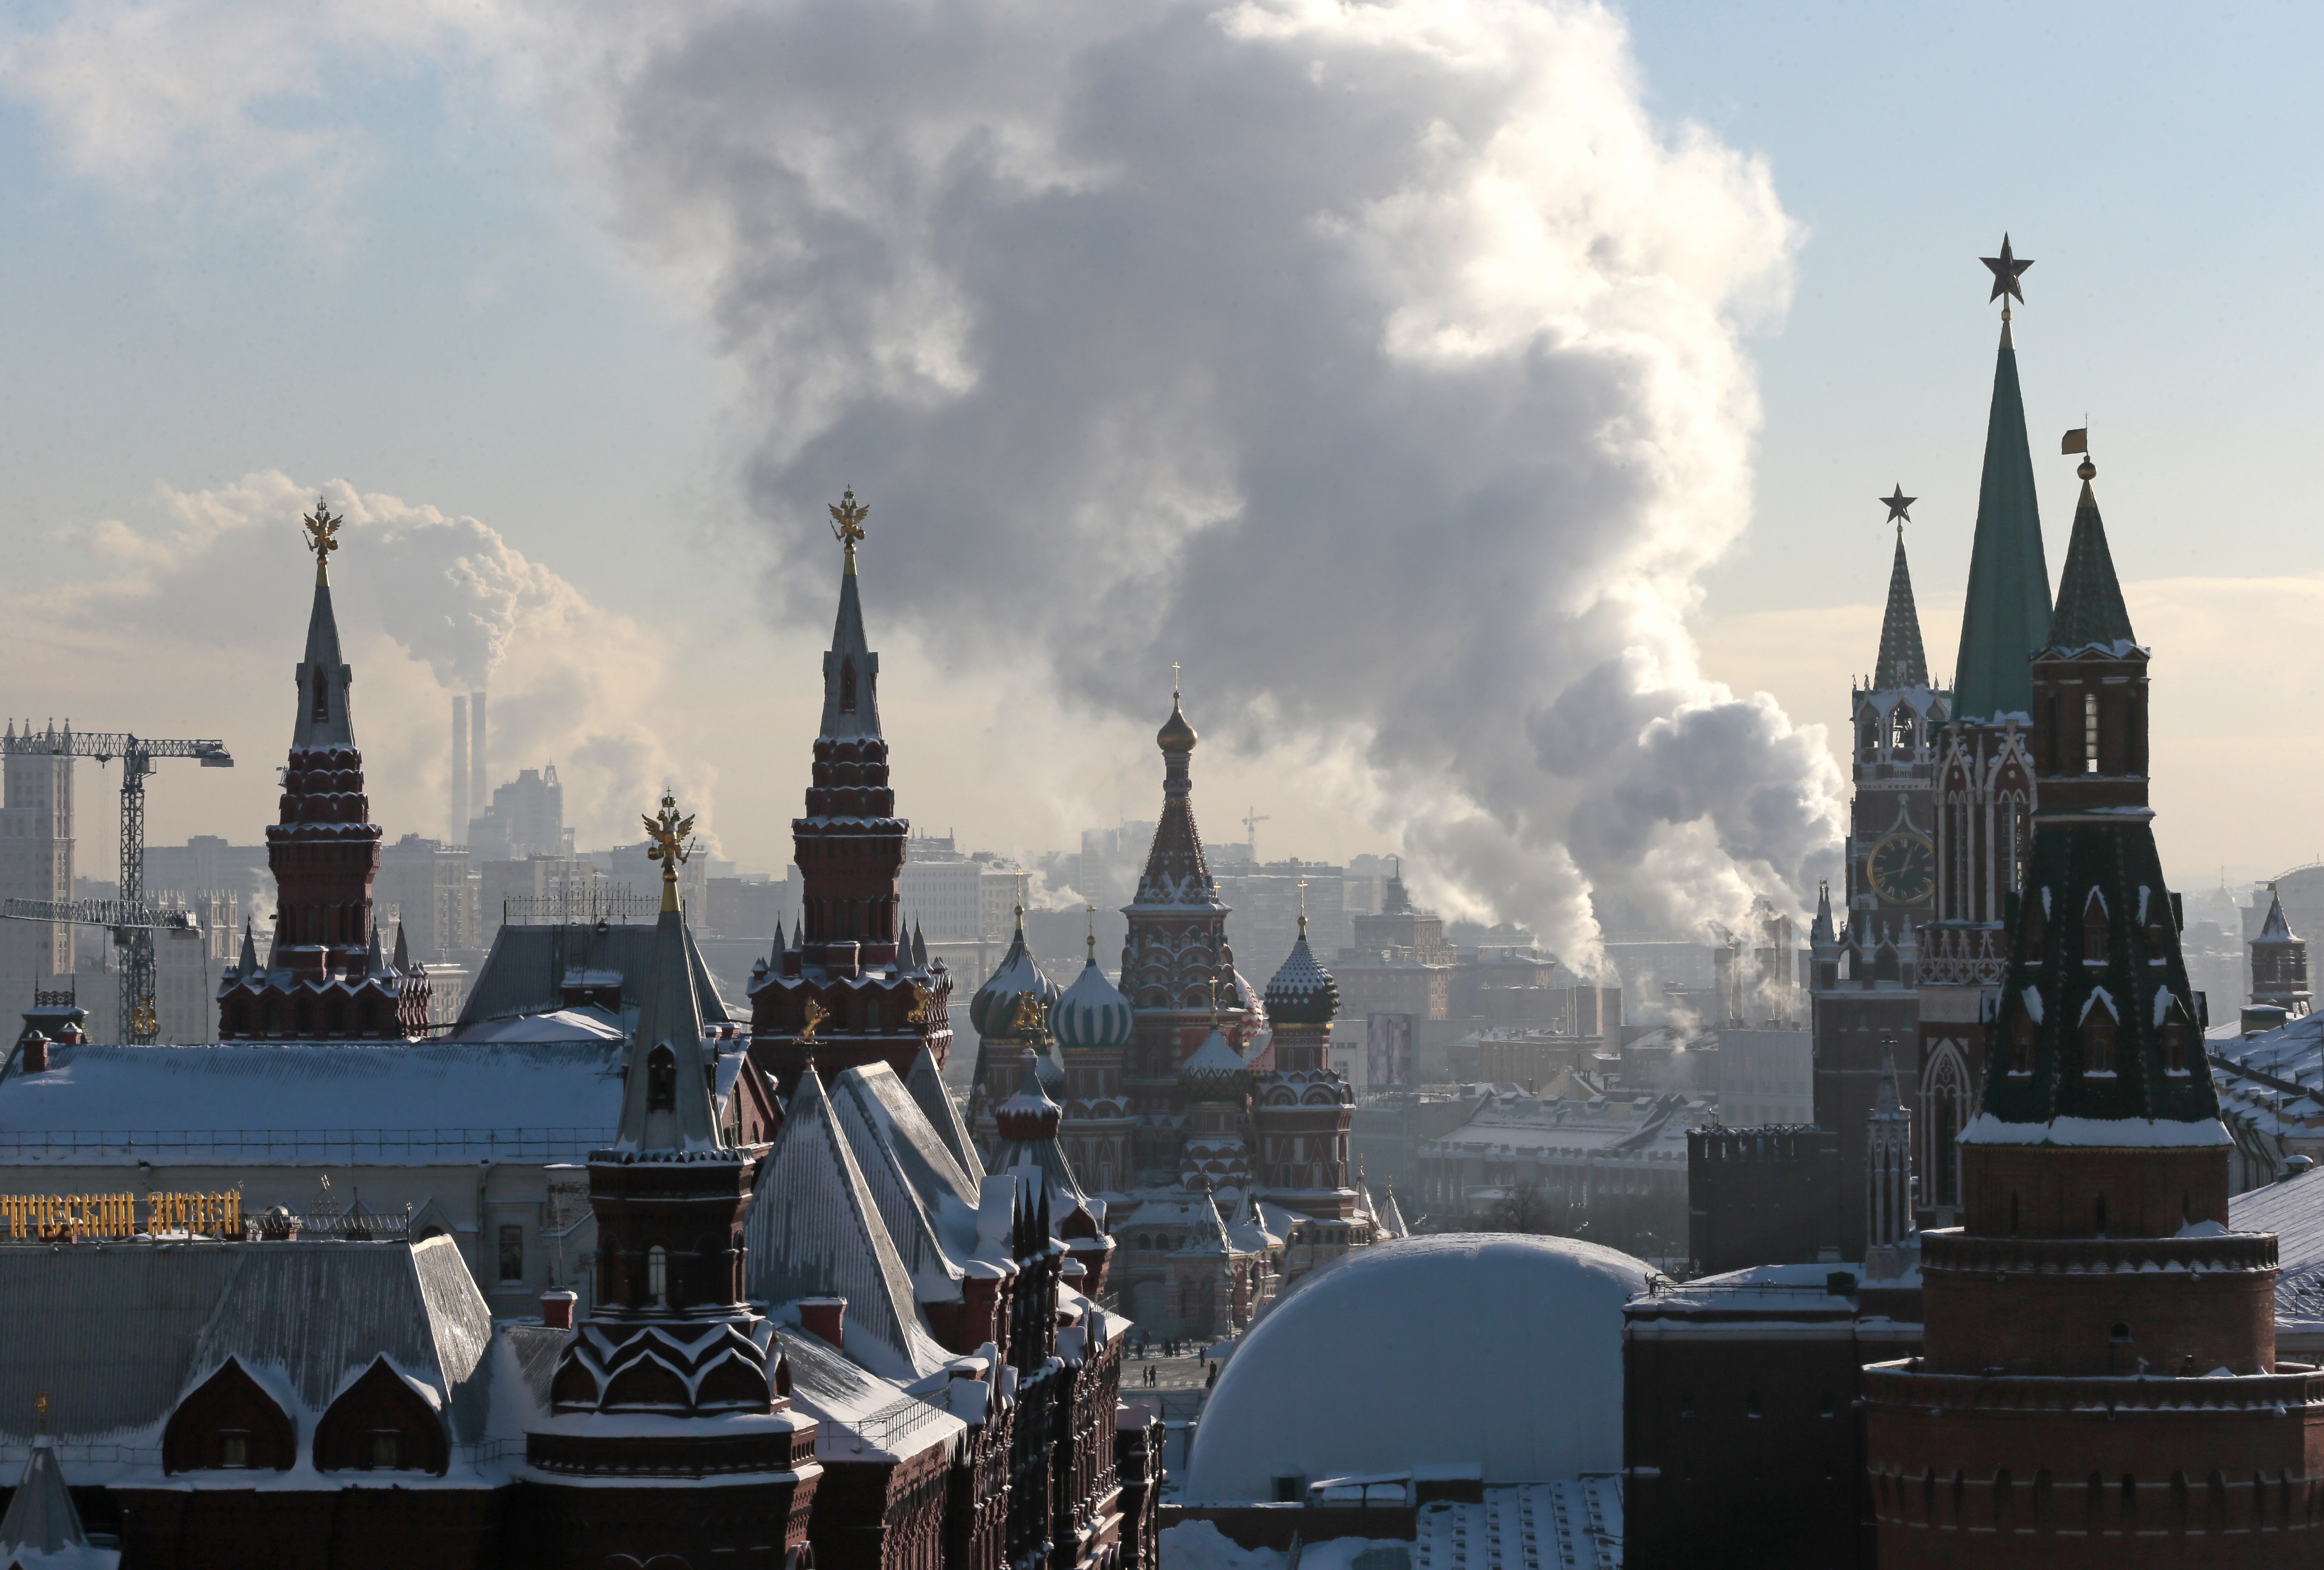 Interior Ministry in Moscow makes arrests ahead of Winter Olympics. Photo: AP